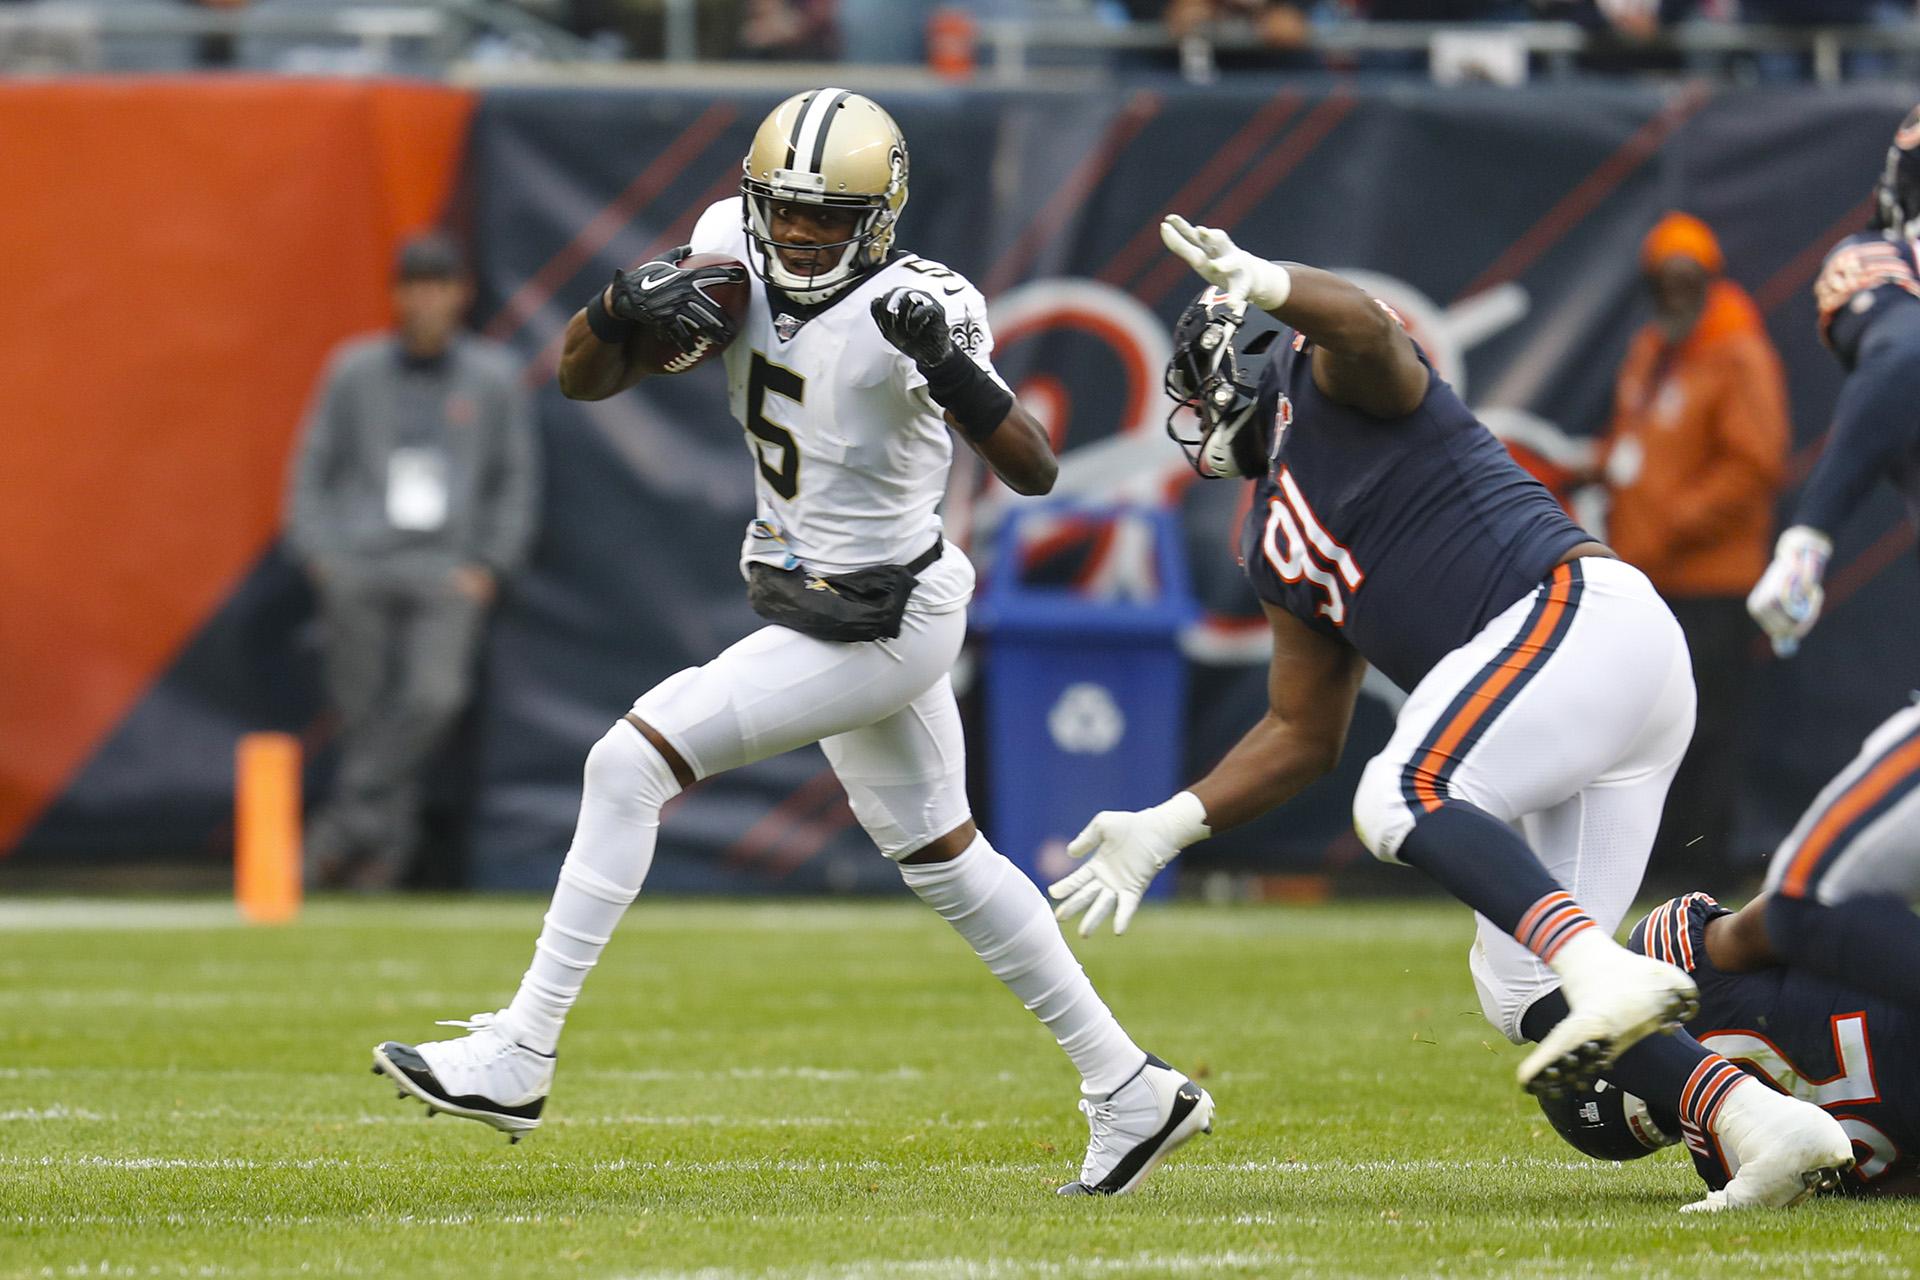 New Orleans Saints quarterback Teddy Bridgewater (5) is chased by Chicago Bears nose tackle Eddie Goldman (91) during the first half of an NFL football game in Chicago, Sunday, Oct. 20, 2019. (AP Photo / Charles Rex Arbogast)